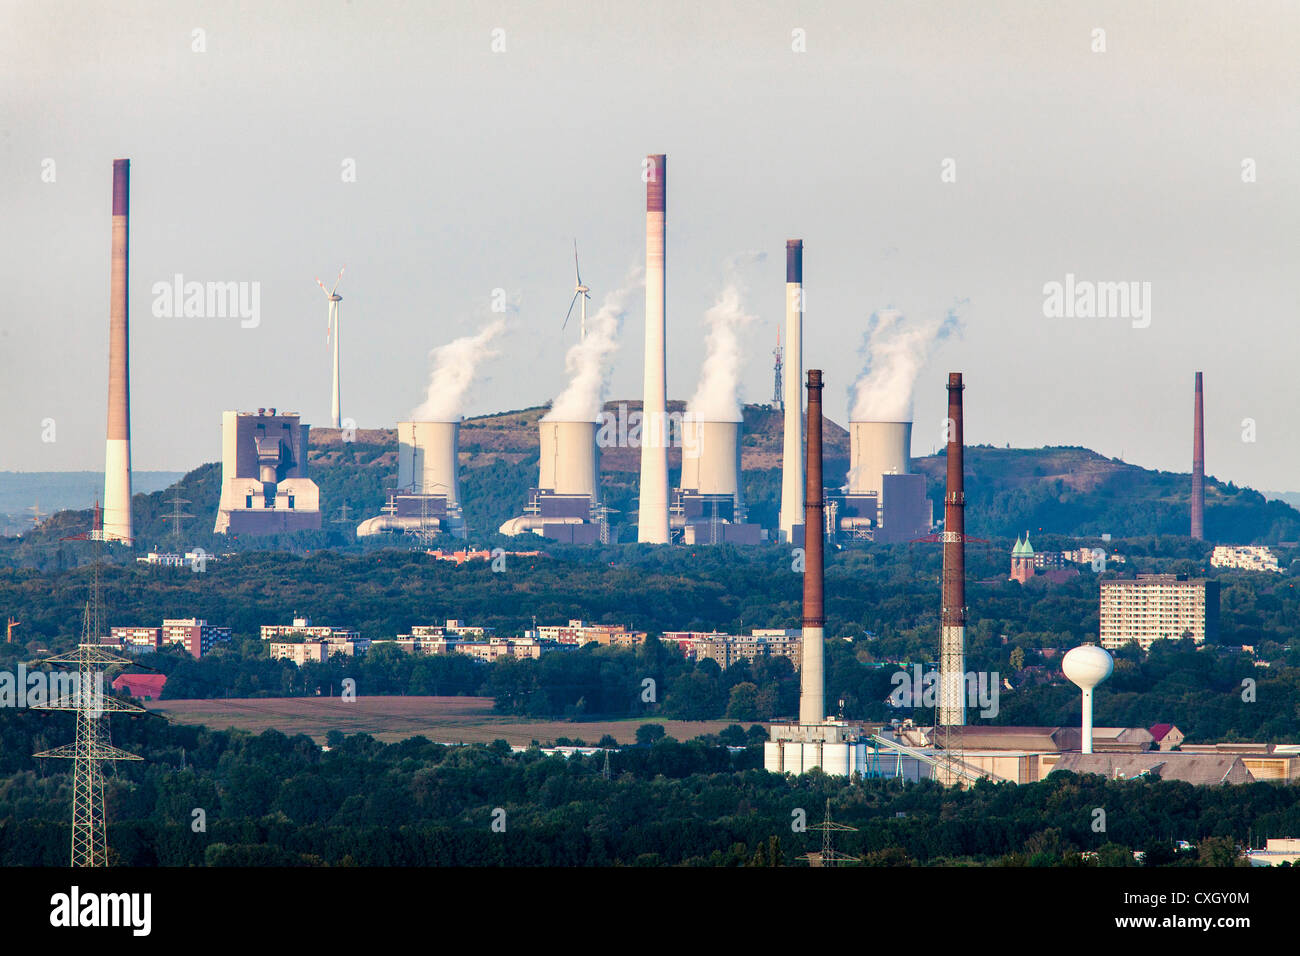 EON coal power station 'Scholven', wind power station on a stock pile. Gelsenkirchen, Germany, Europe Stock Photo